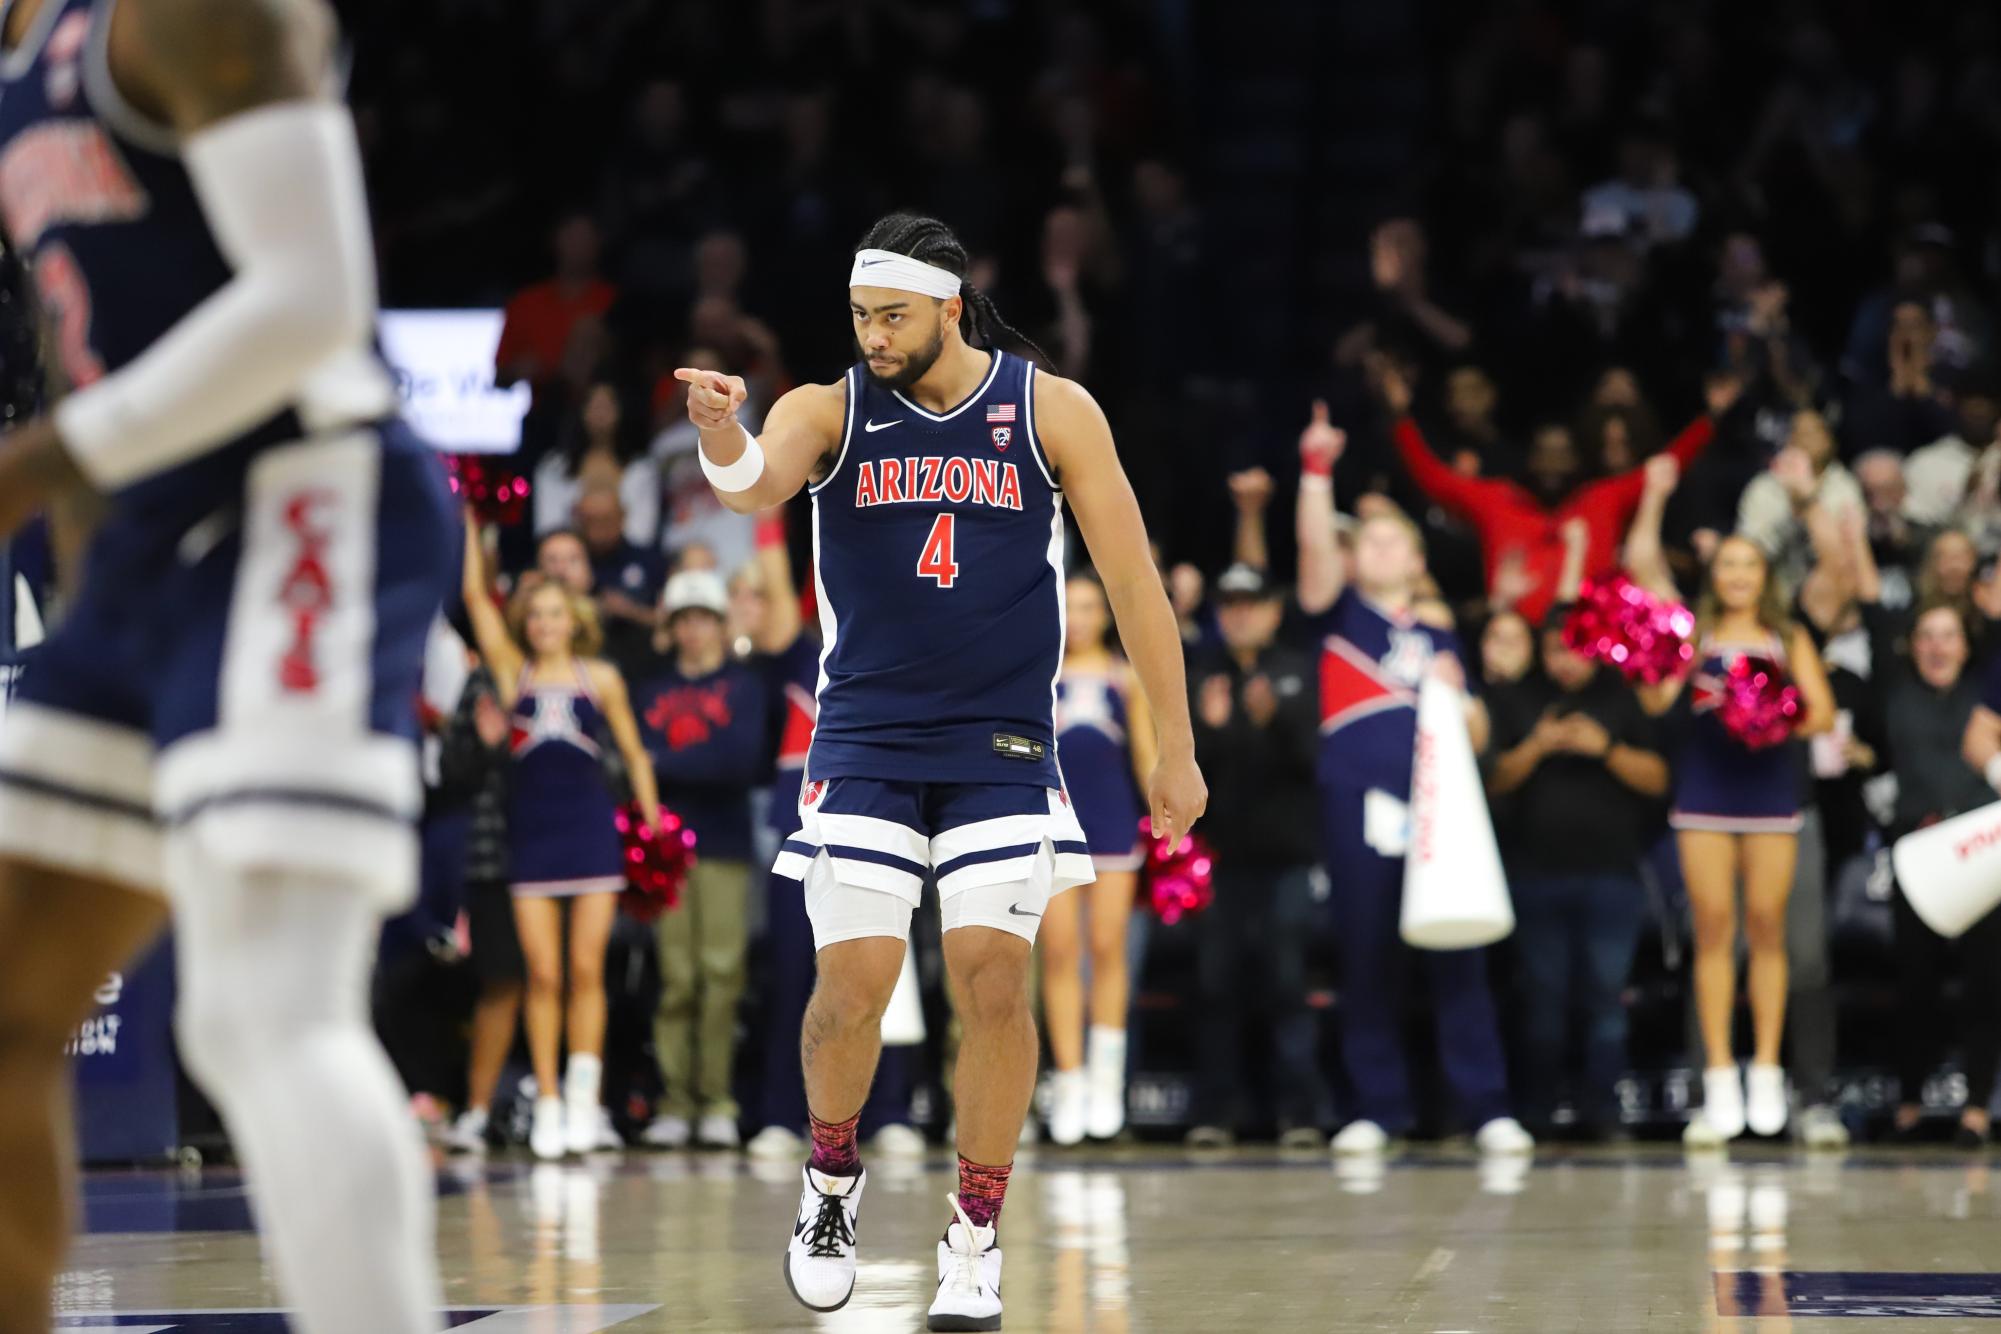 No. 2 Arizona cruises past No. 15 seed Long Beach State in the first round of the NCAA Tournament